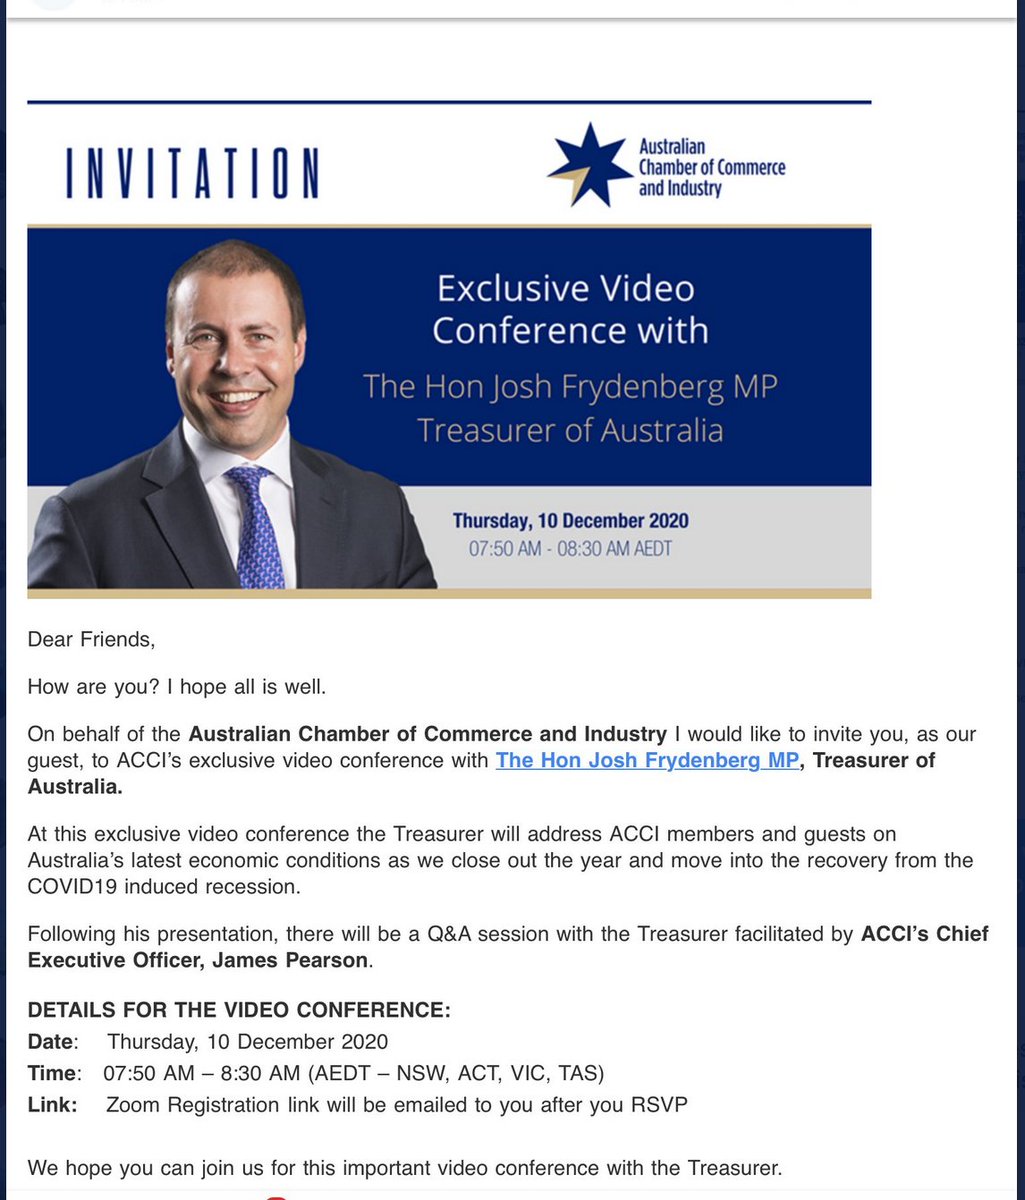 Here's just one of thousands of strings at play in the Morrison govt election campaign style of governing.Former NSW Liberal's bagman Paul Nicolaou is actively promoting Zoom conferences with notable LNP figures via LinkedIn.It's marketing spin. It's 24 hour electioneering..